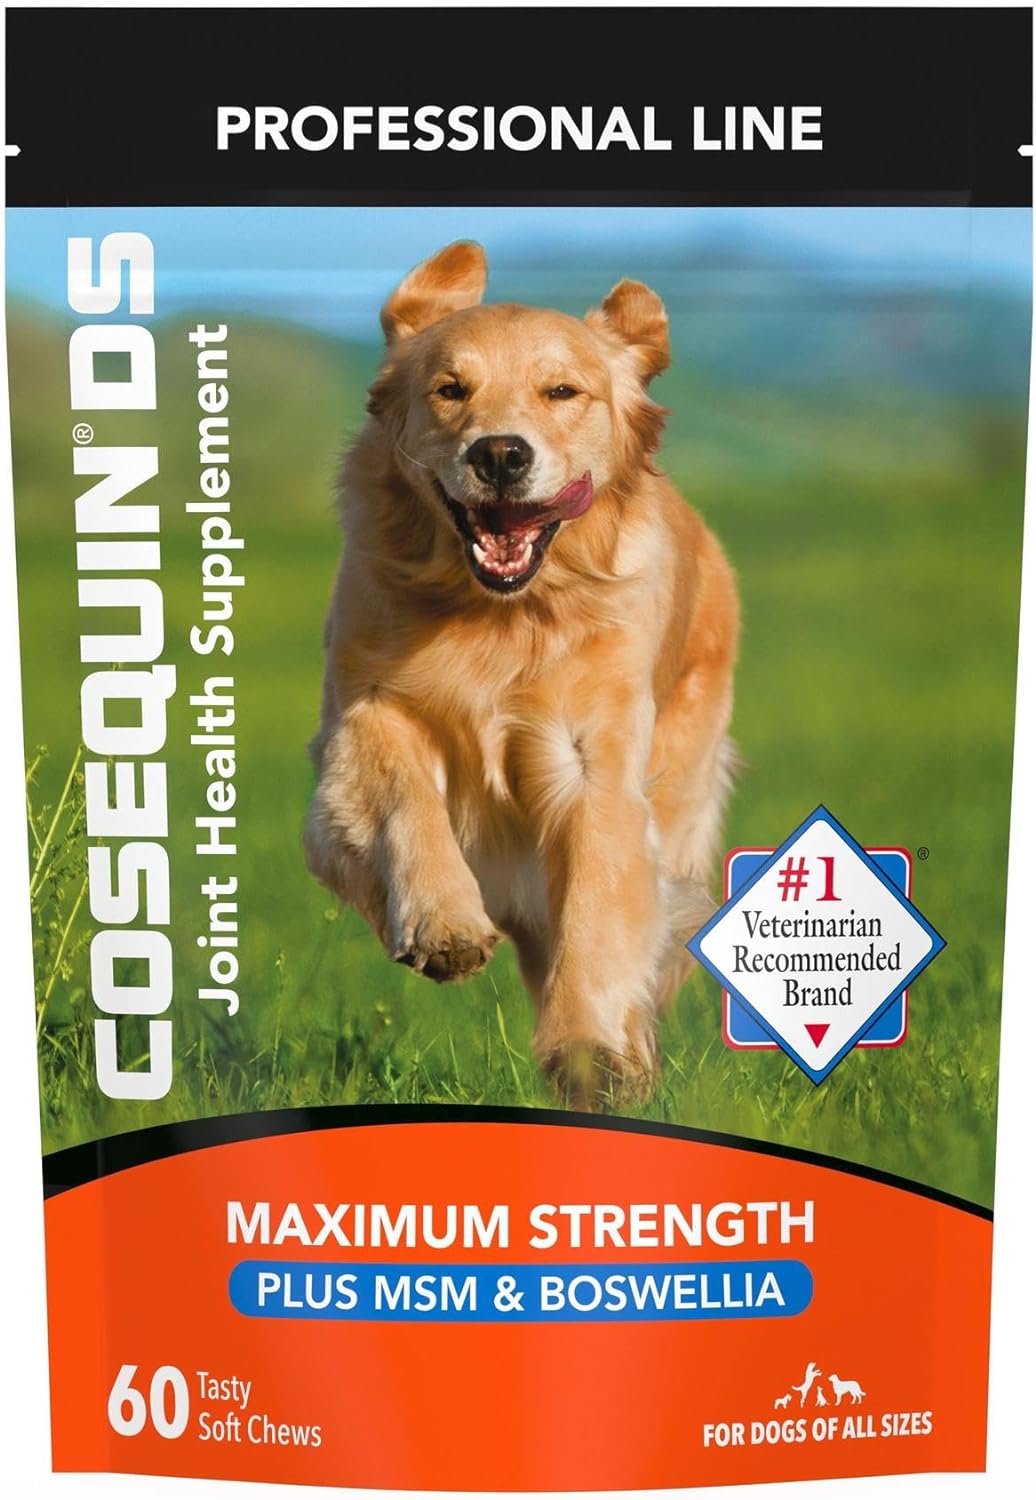 Nutramax Laboratories Cosequin DS Plus MSM Professional Line for Dogs, 60 soft chews